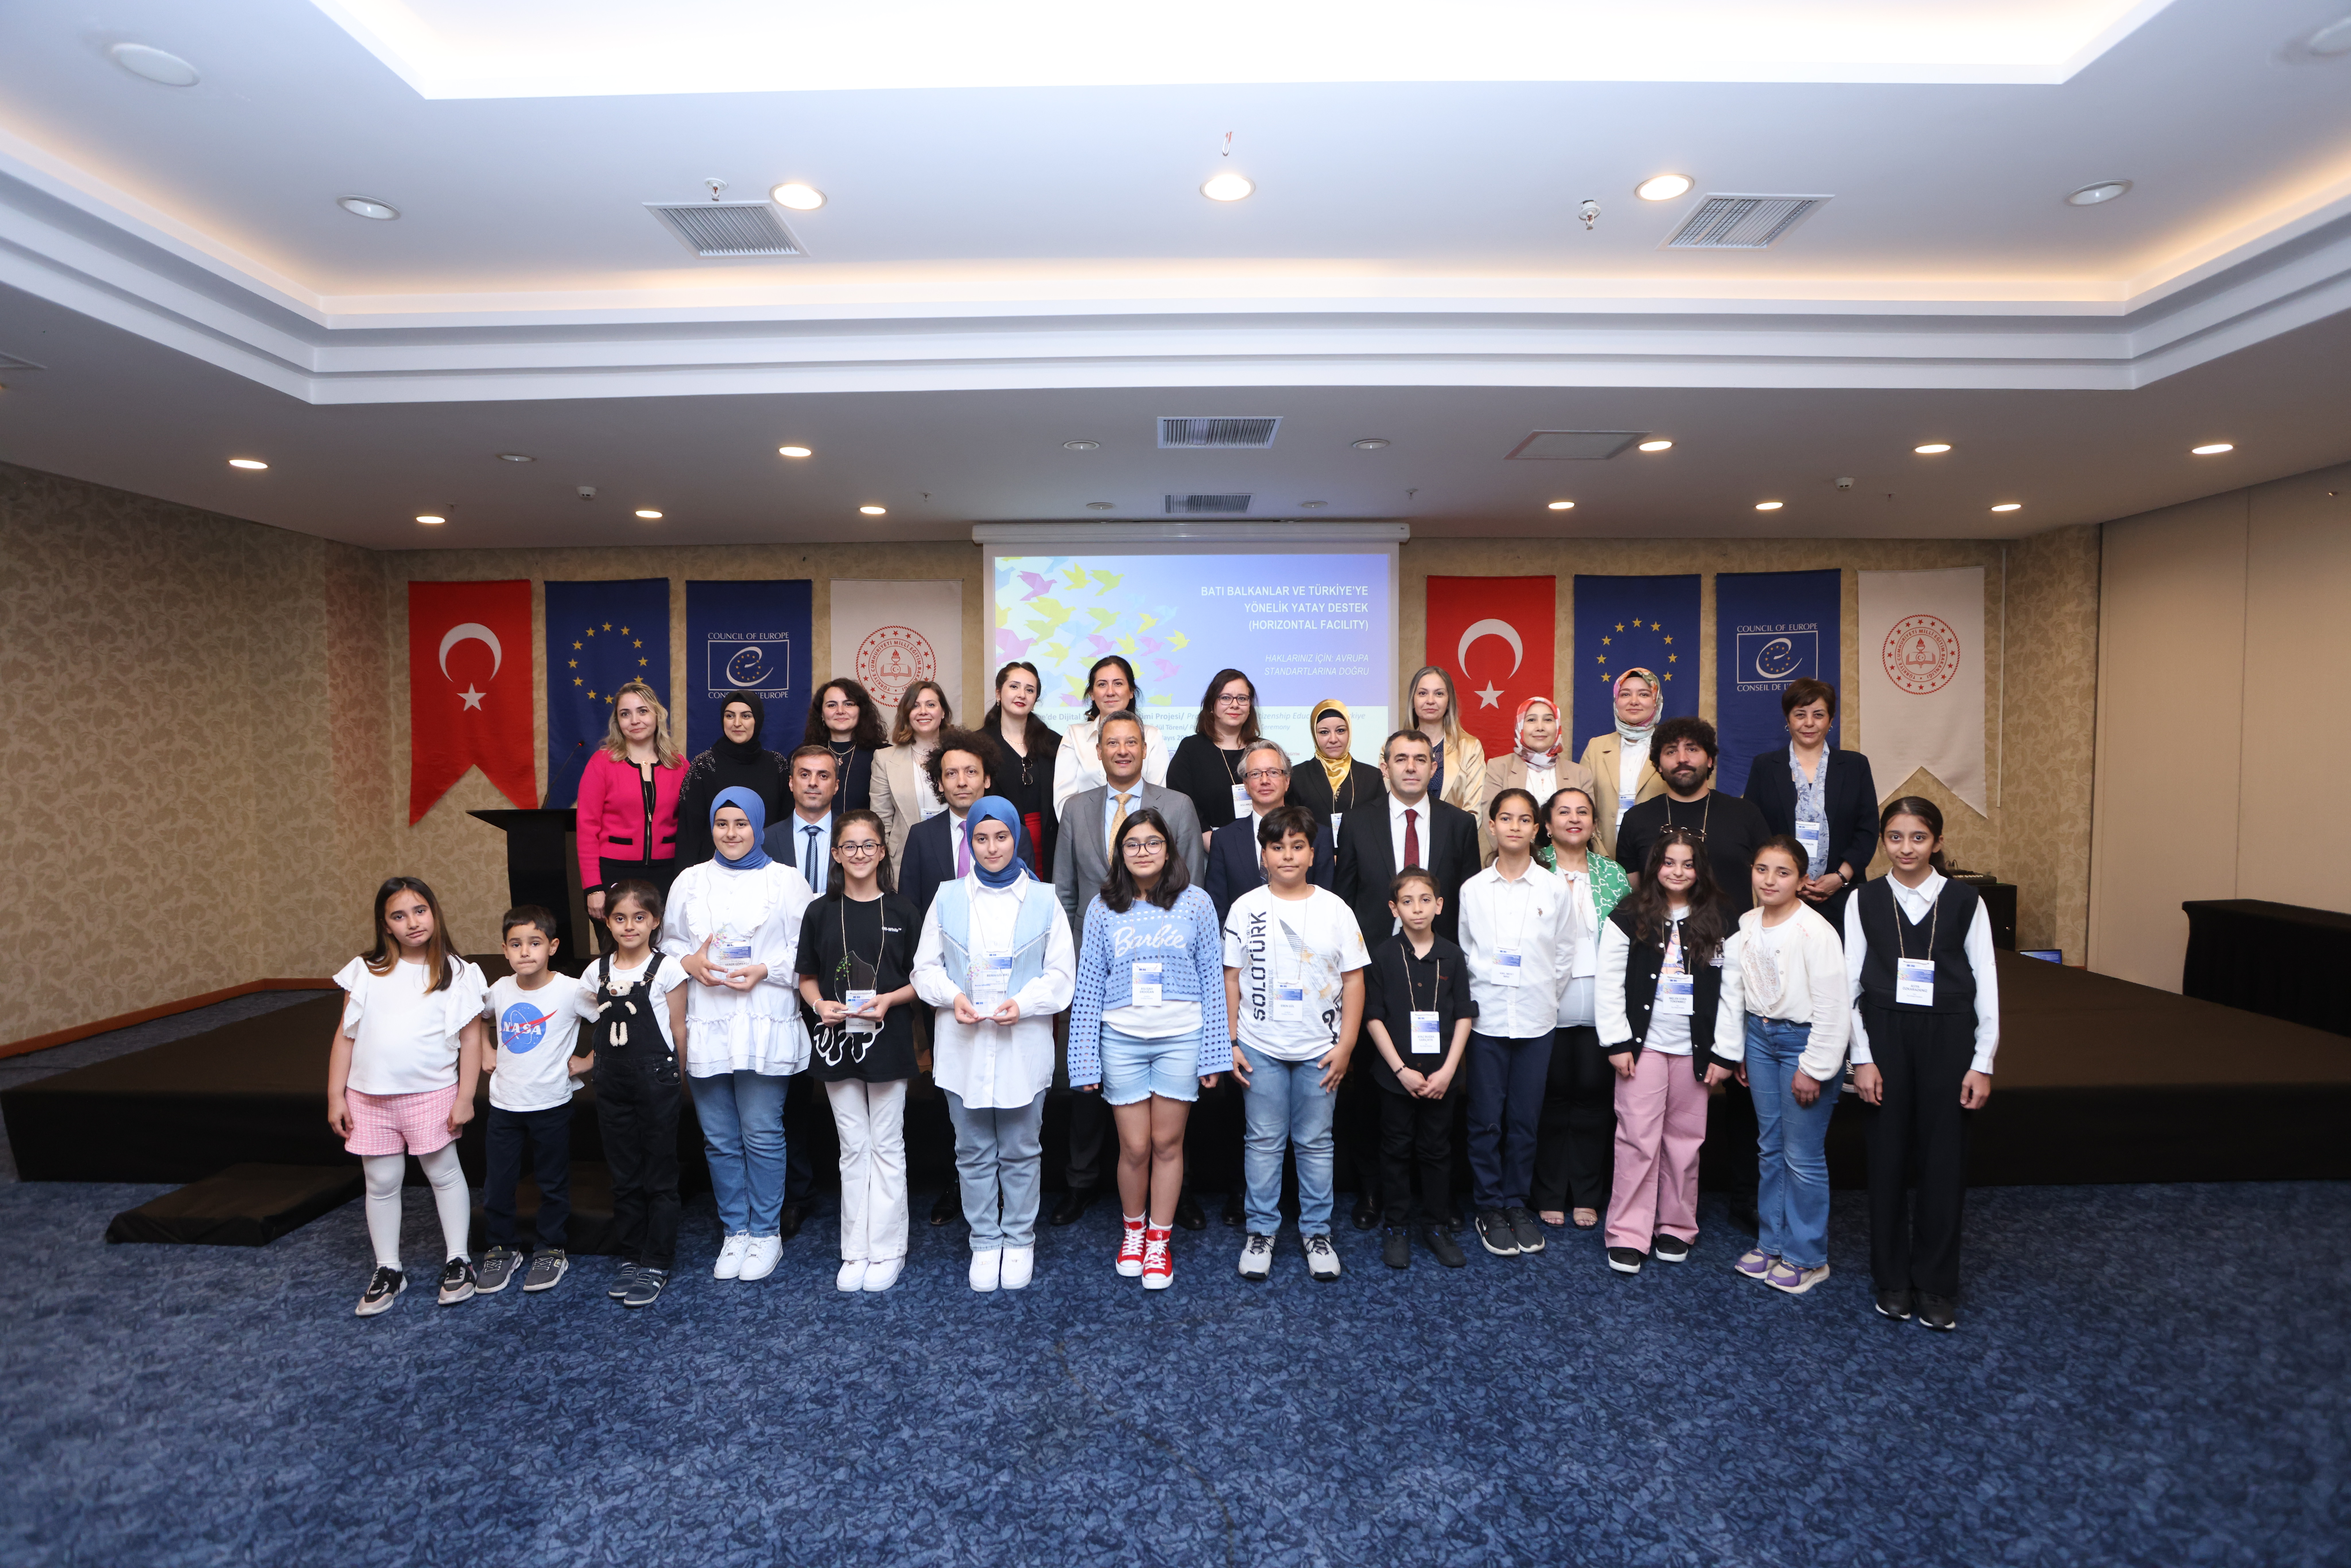 The Award Ceremony of the Podcast Contest gathers the winner students in Ankara